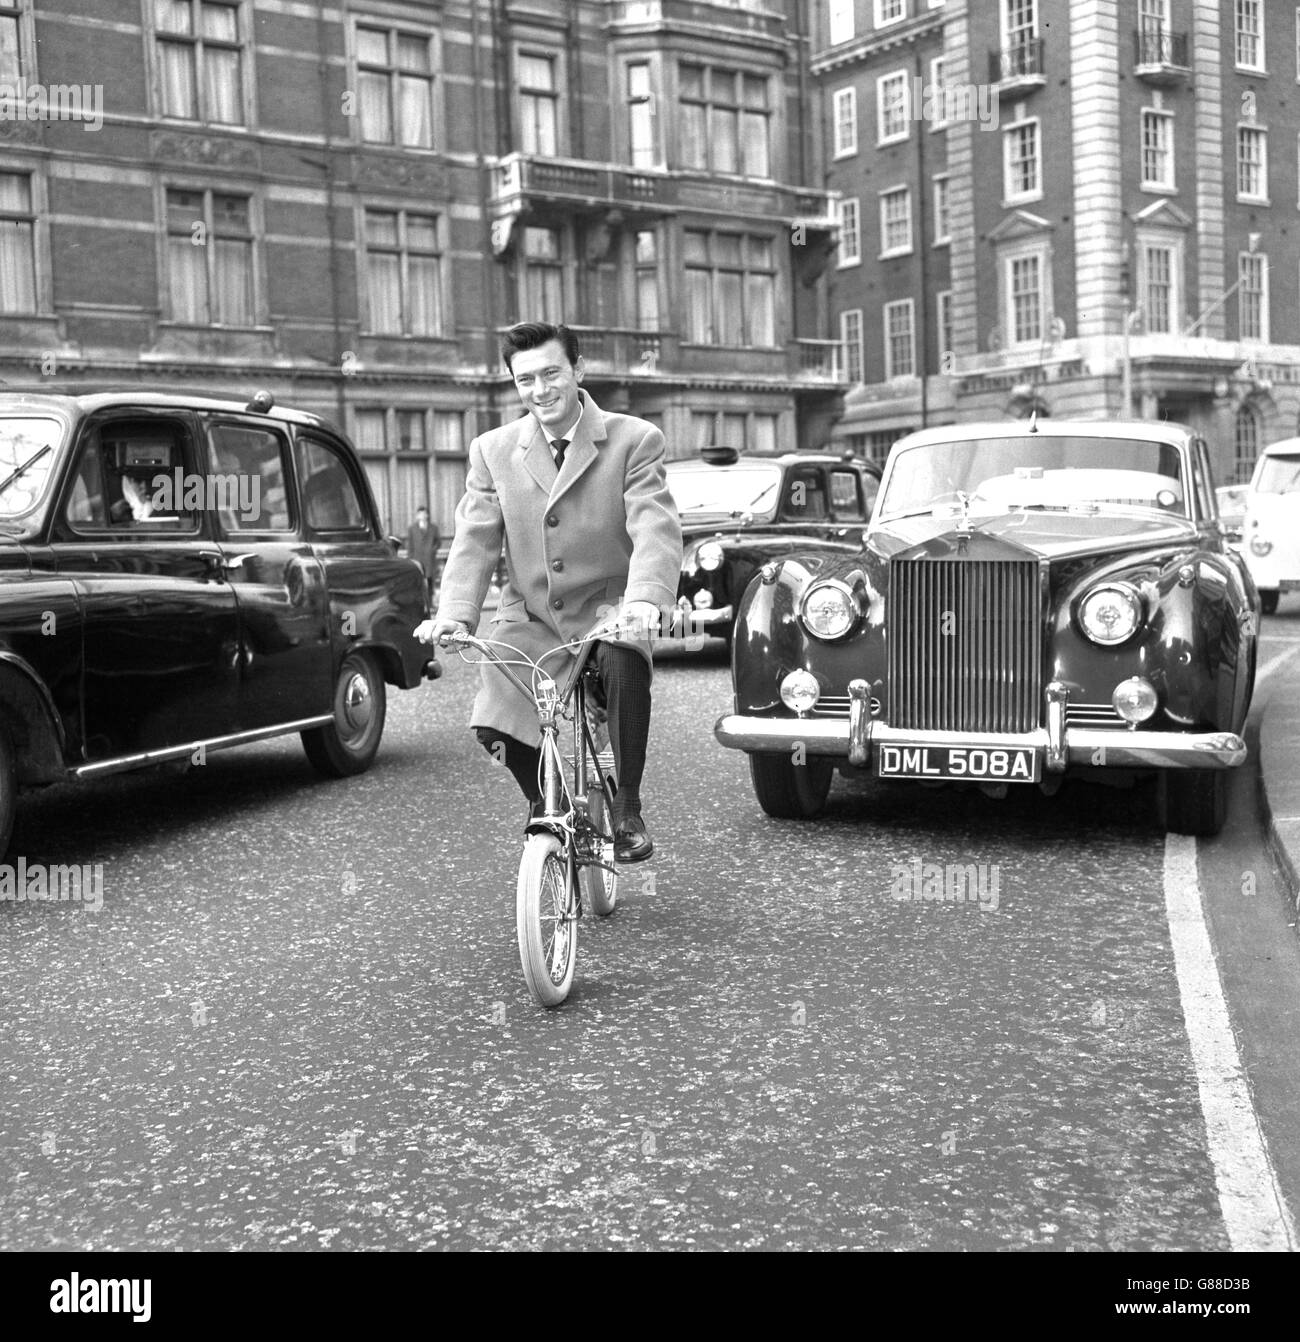 Film star Laurence Harvey has found two wheels the best means of beating the traffic jams in big cities. He bought this Raleigh Compact folding bicycle, which packs easily into the boot of his car. If necessary, he can park on the outskirts and cycle in. Laurence, star of 'Life at the Top', purchased the bike in London so that he could take it back to the States. Stock Photo